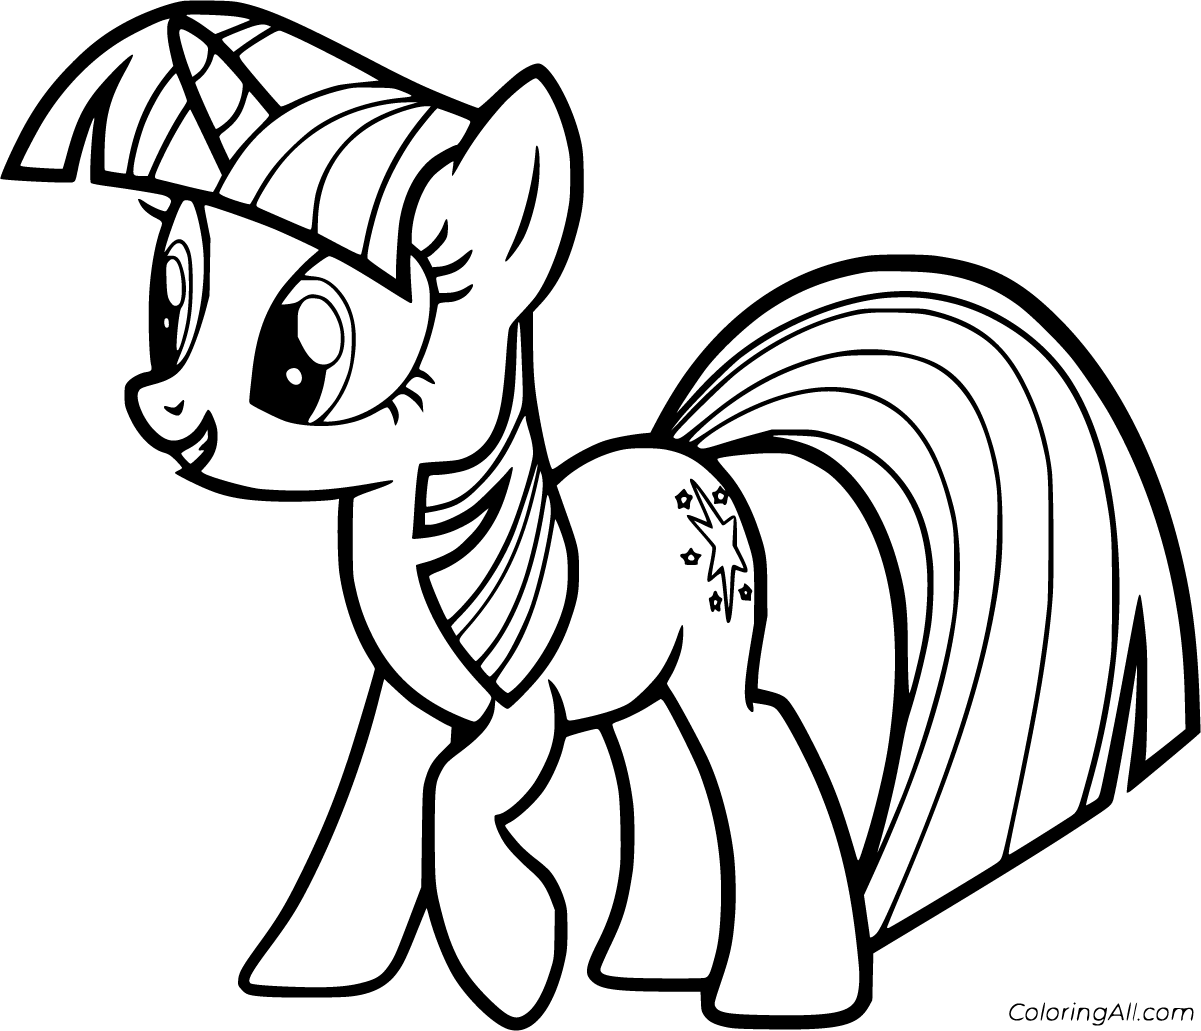 Twilight Sparkle Coloring Pages   ColoringAll